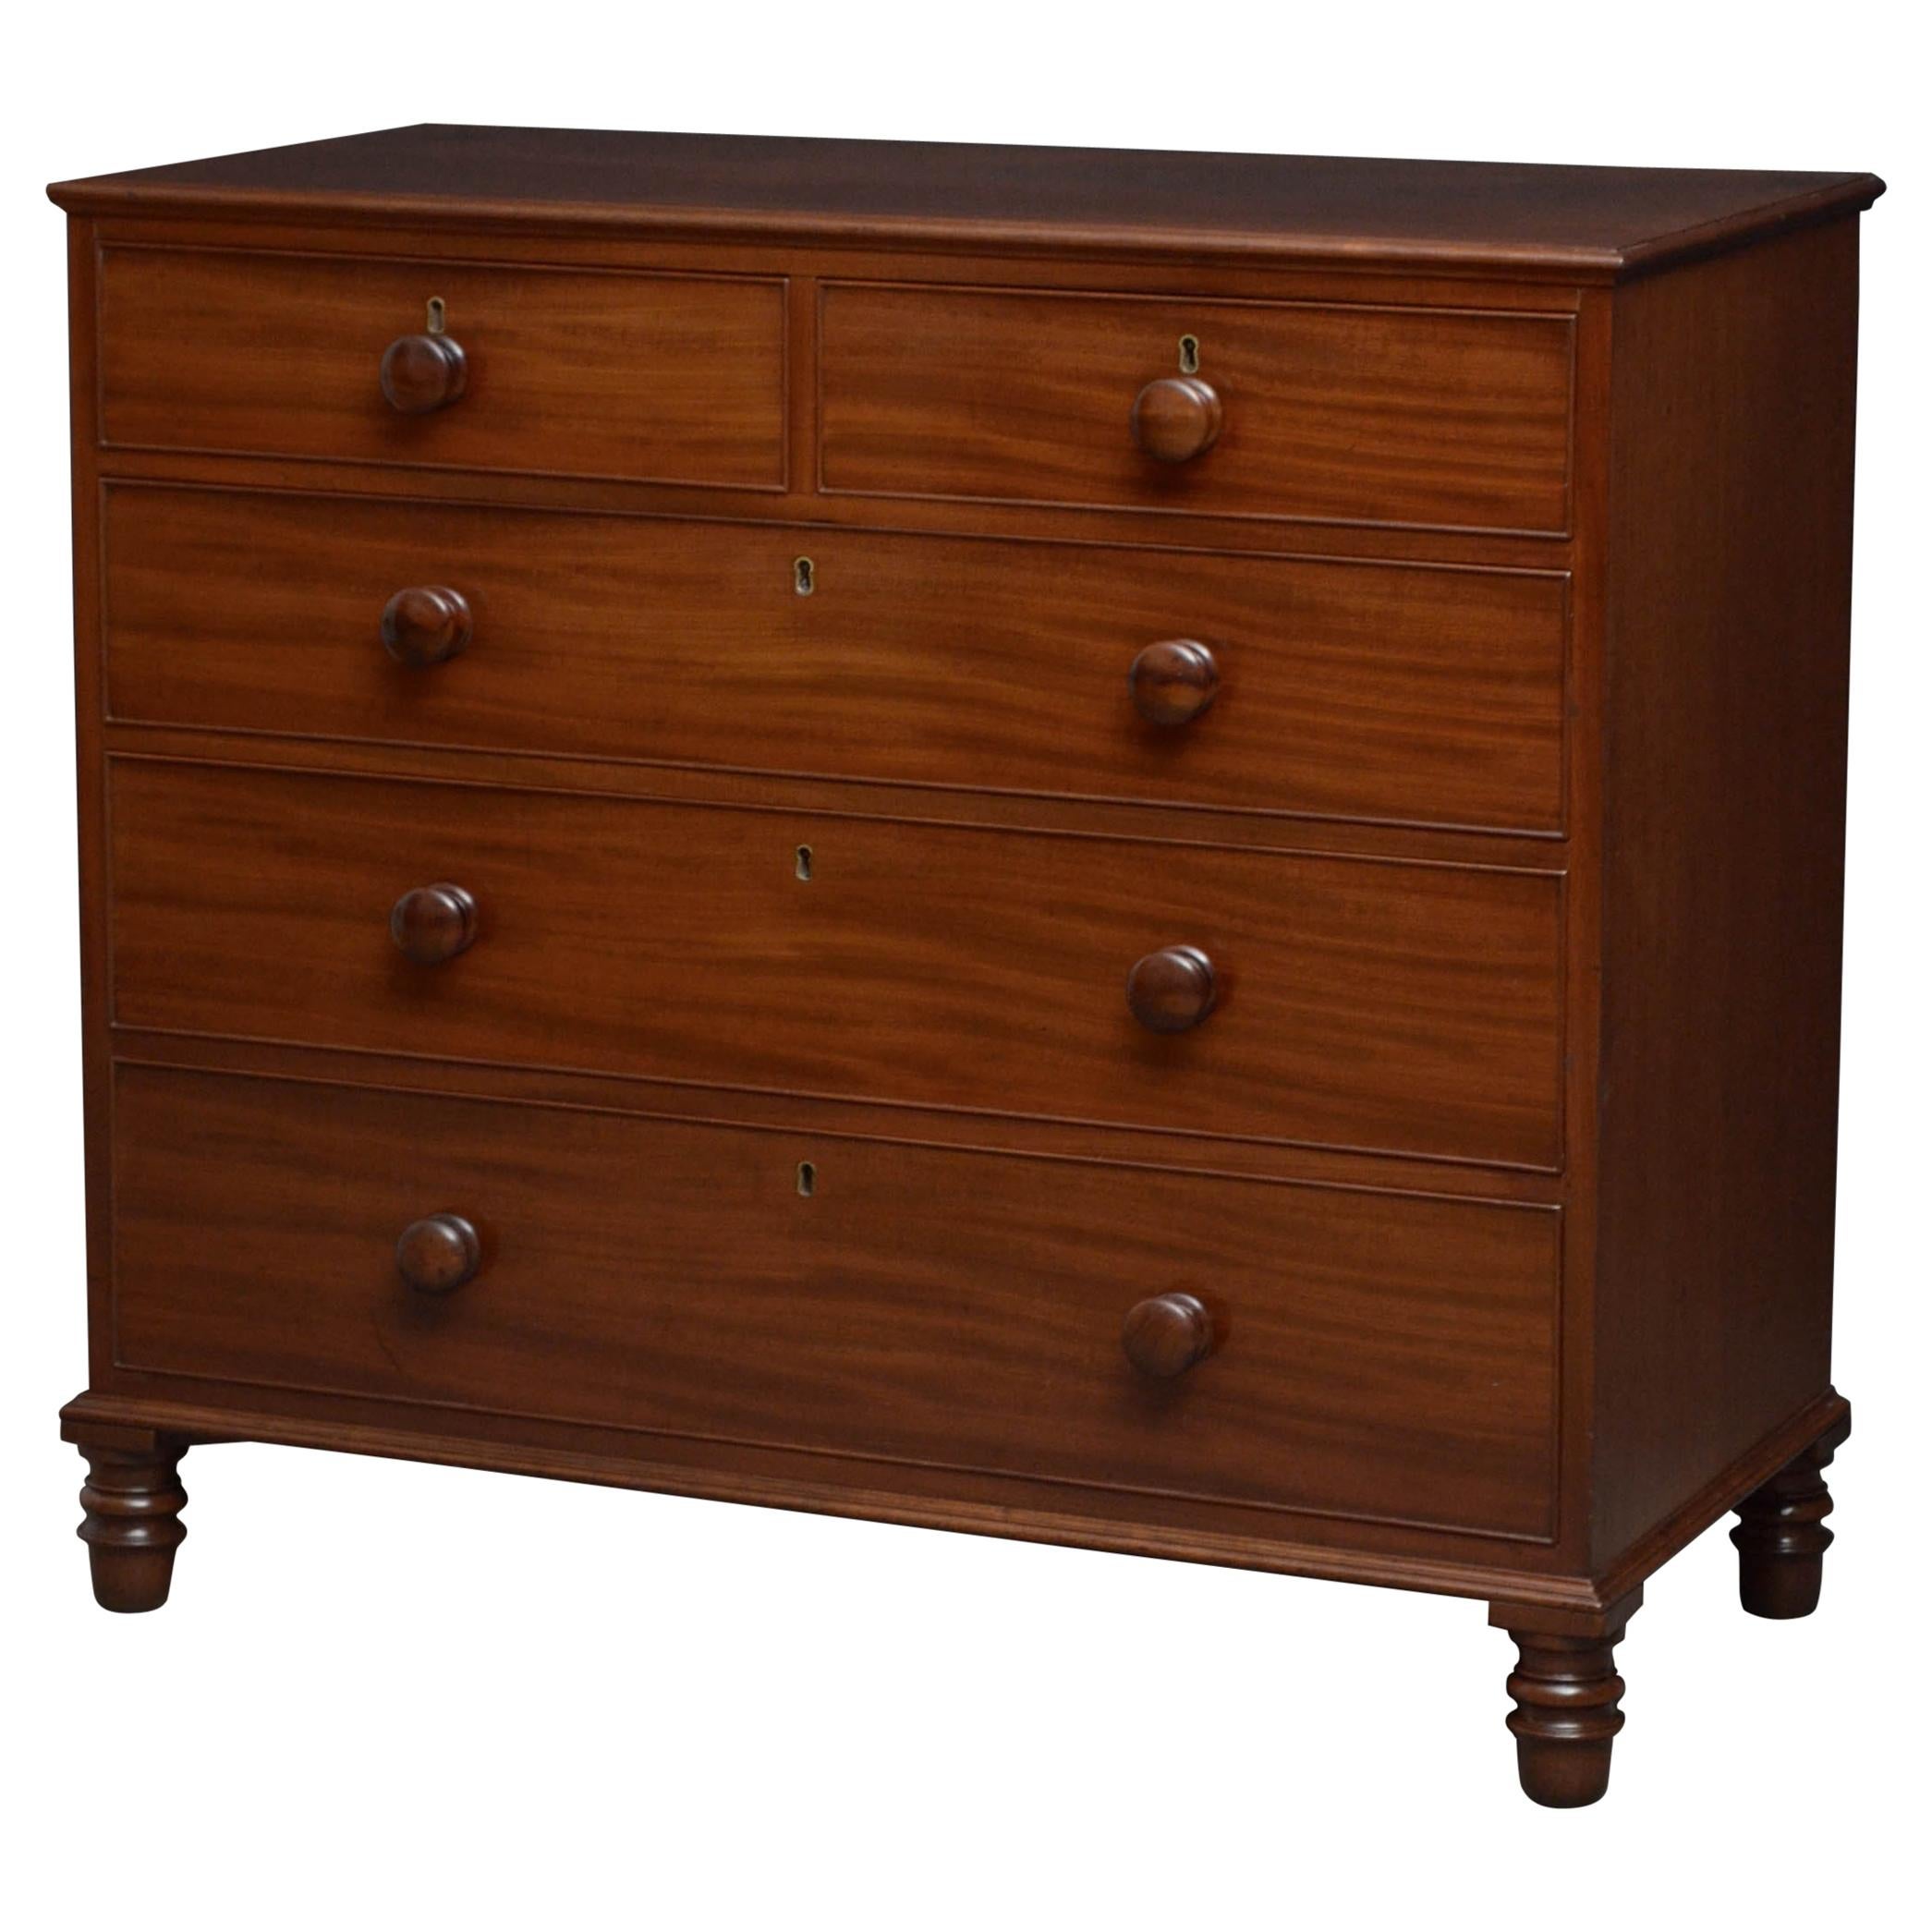 George IV Mahogany Chest Of Drawers by HY Walker Lancaster